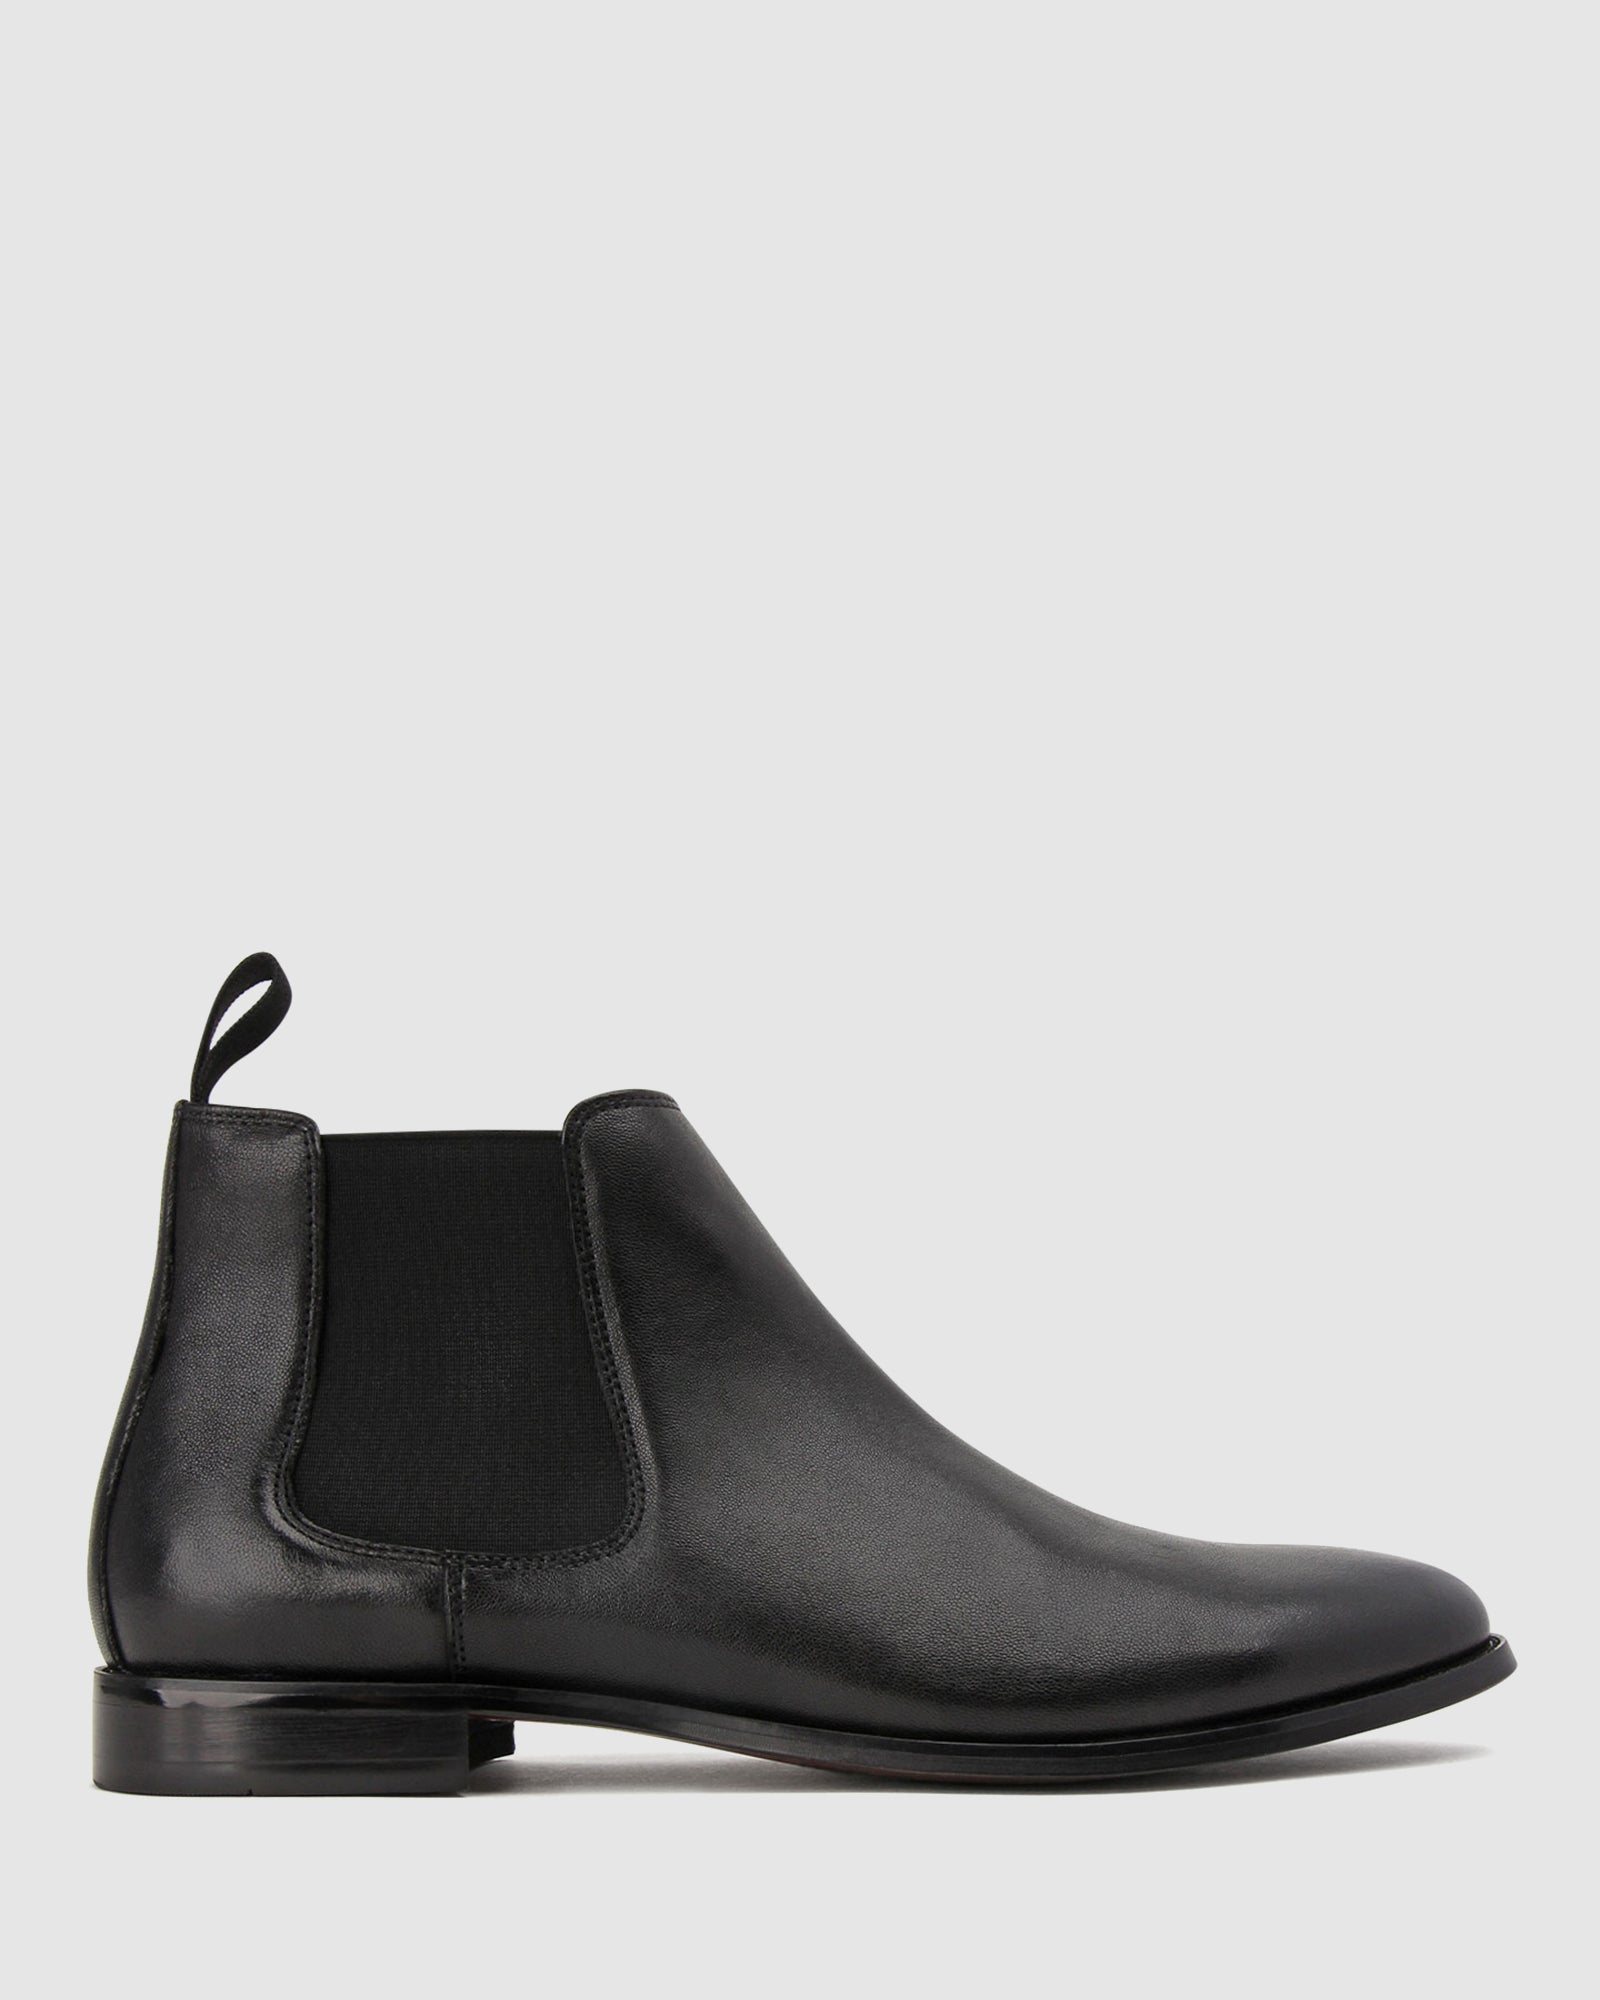 Buy OSCAR Leather Dress boots by Airflex online - Betts